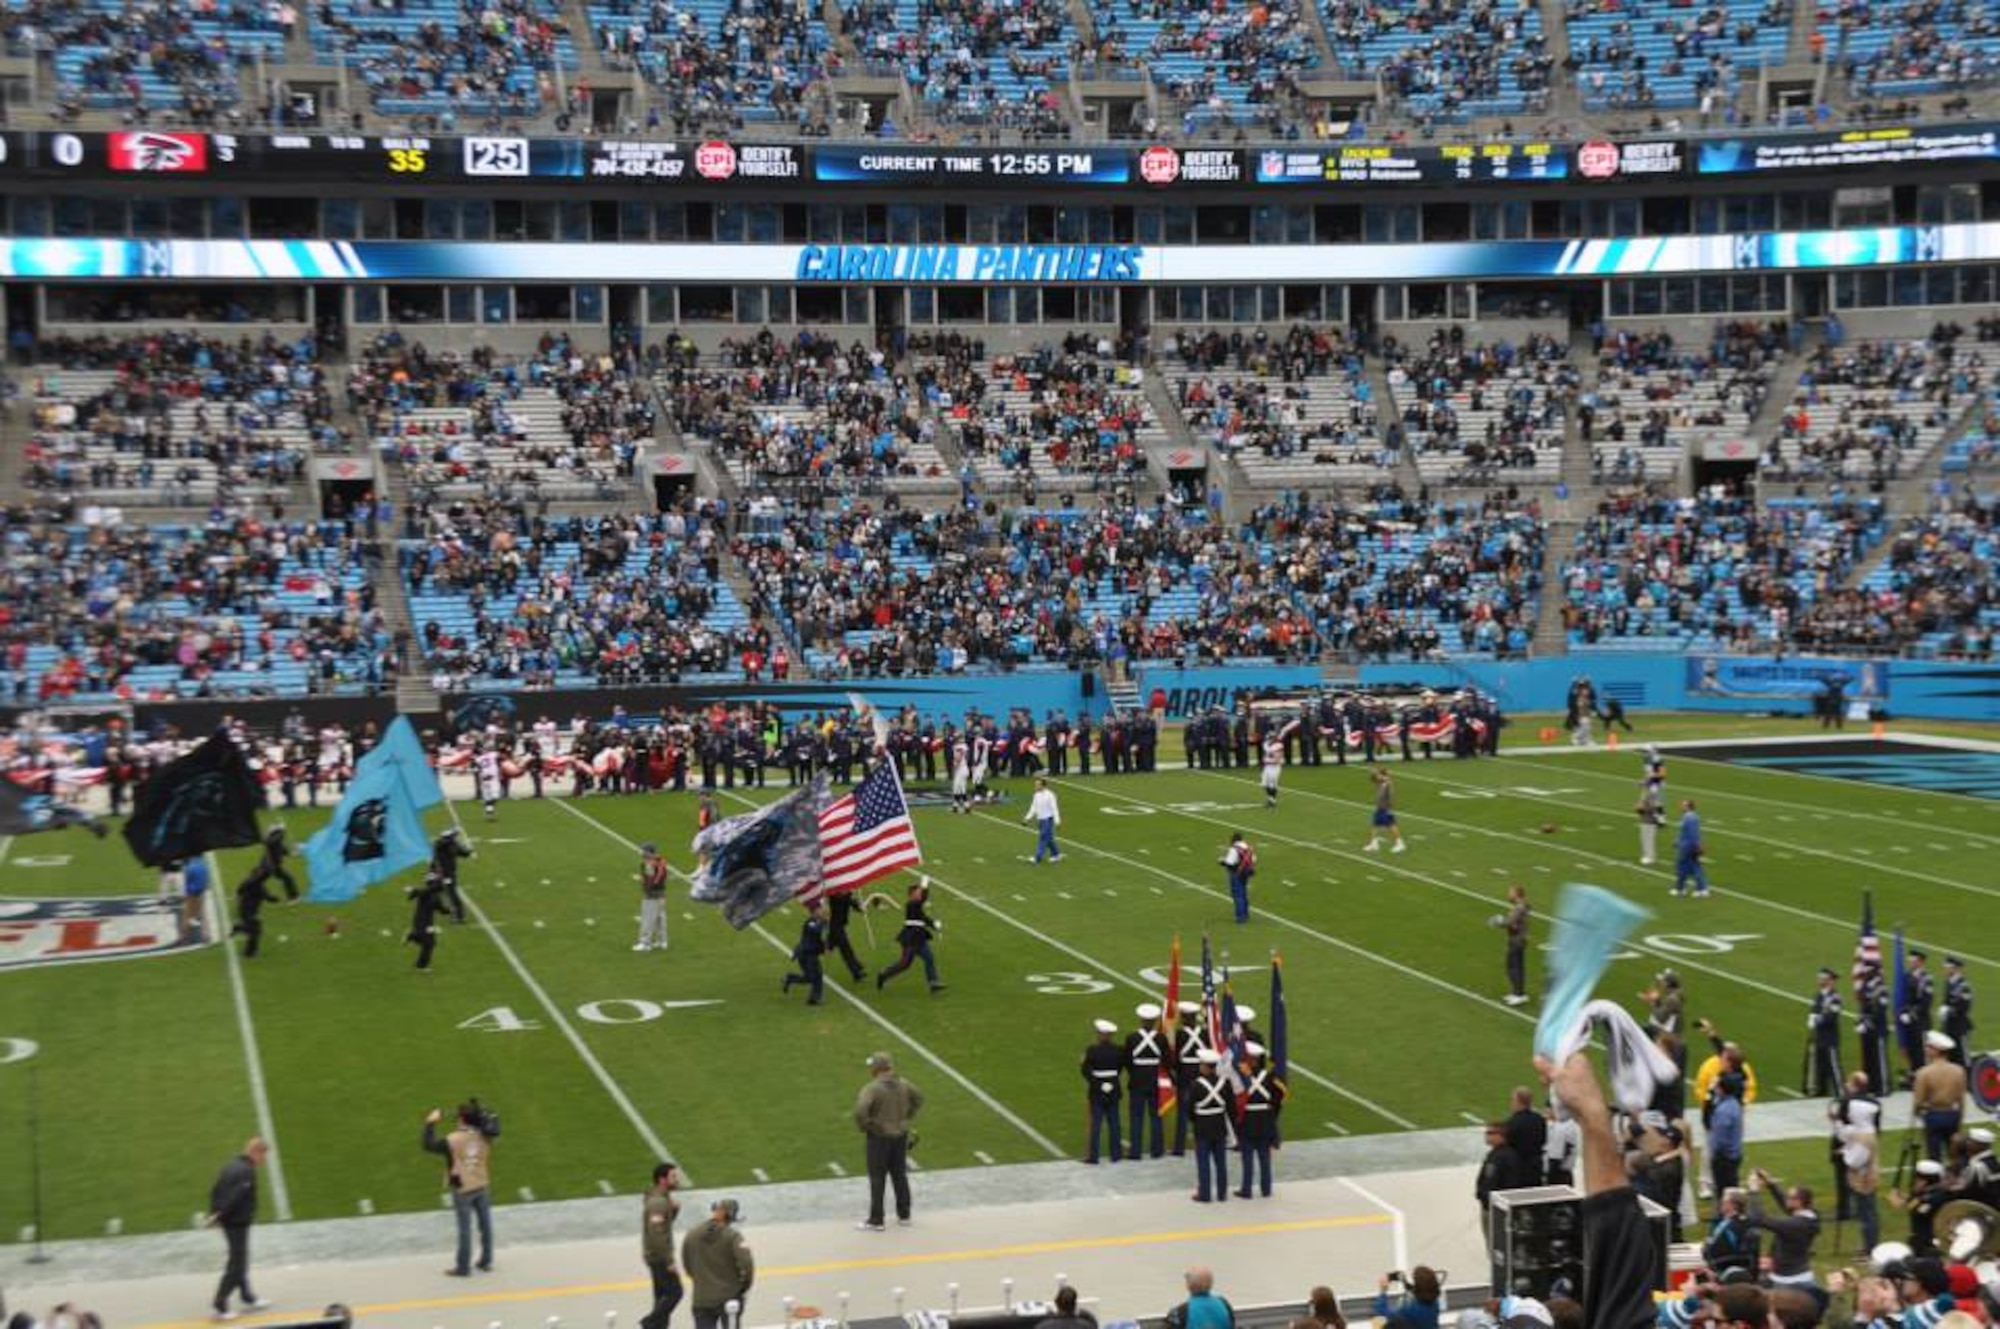 Service members run onto the field before the start of the game at the Carolina Panthers Salute to Service game at Bank of America Stadium, Charlotte, N.C., Nov. 16, 2014. Service members from all five branches of the military ran onto the field with the Panthers before the start of the game. (Courtesy photo)